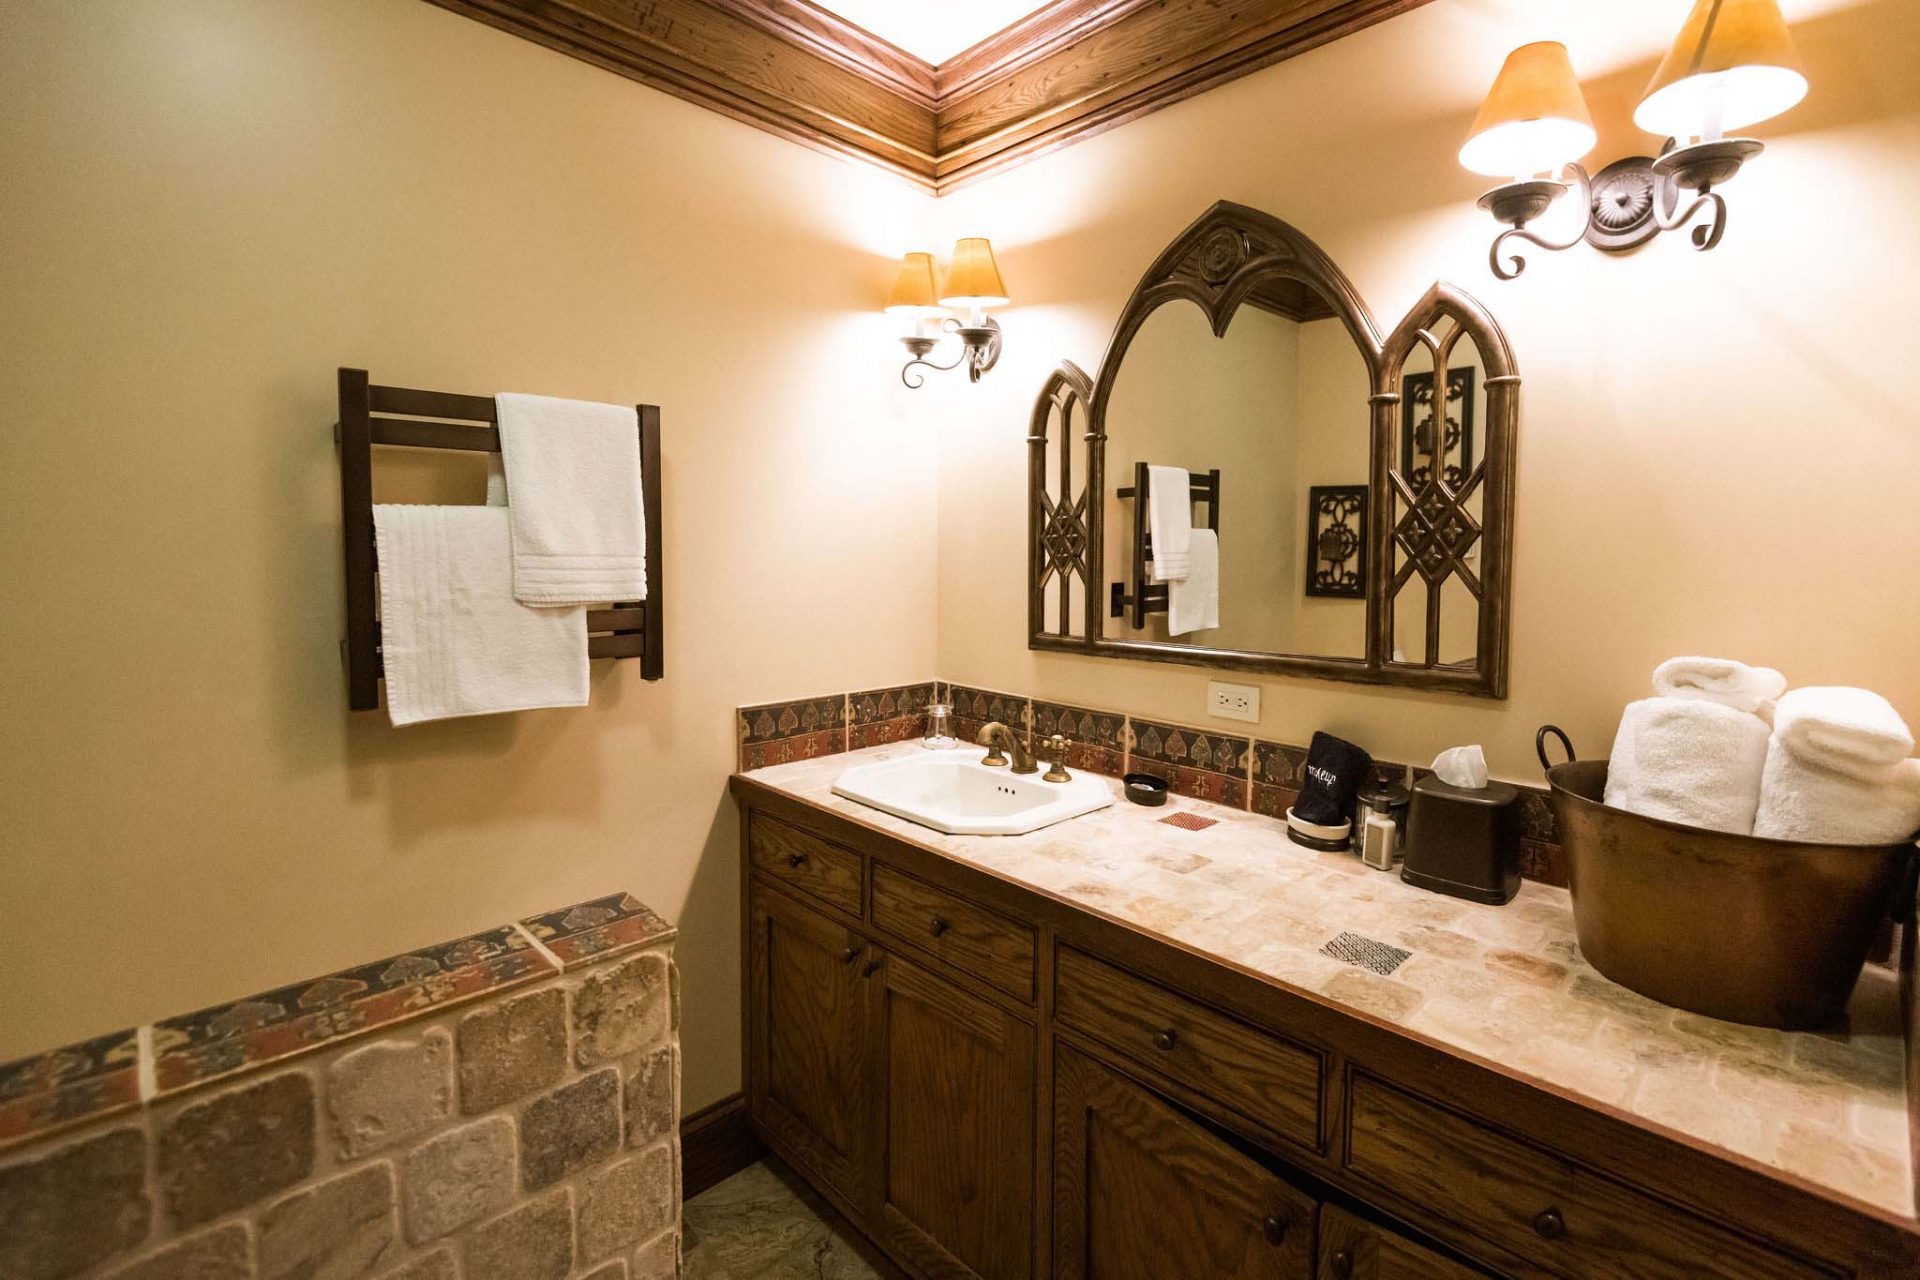 A bathroom with a long set of wooden dressers, stone countertop, and a decorative, gothic style mirror.